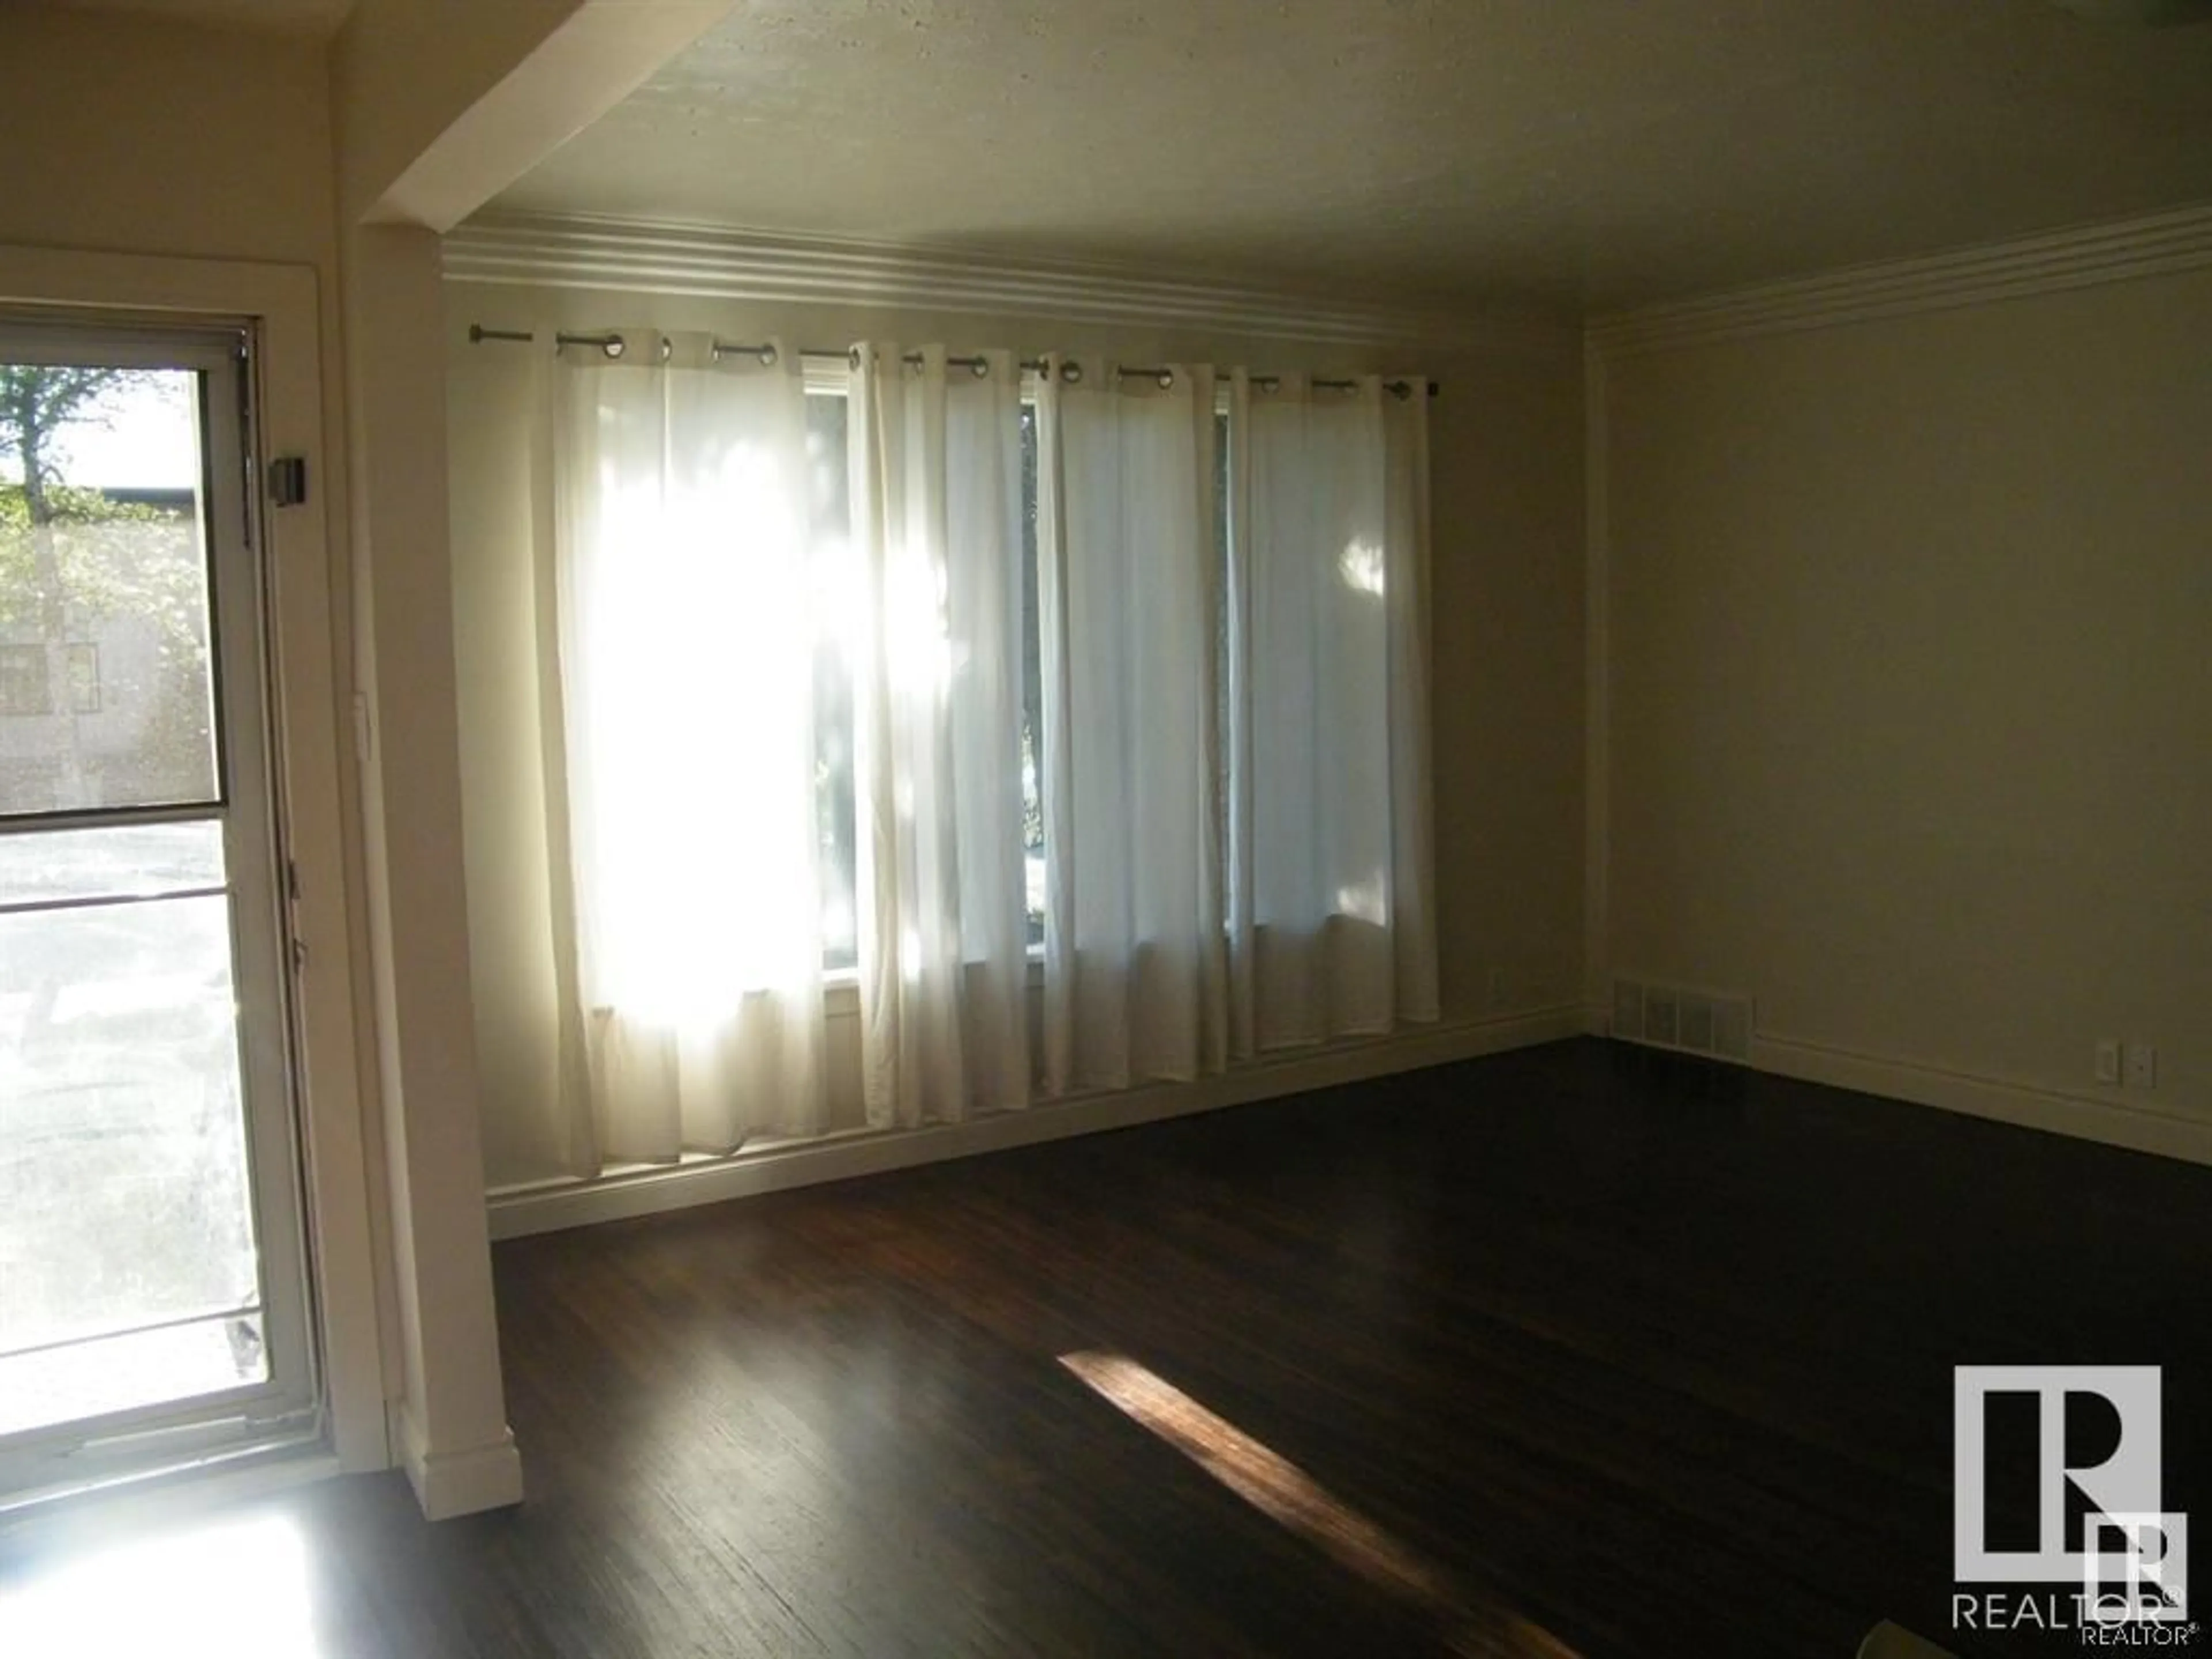 A pic of a room for 9543 87 ST NW, Edmonton Alberta T6C3W9